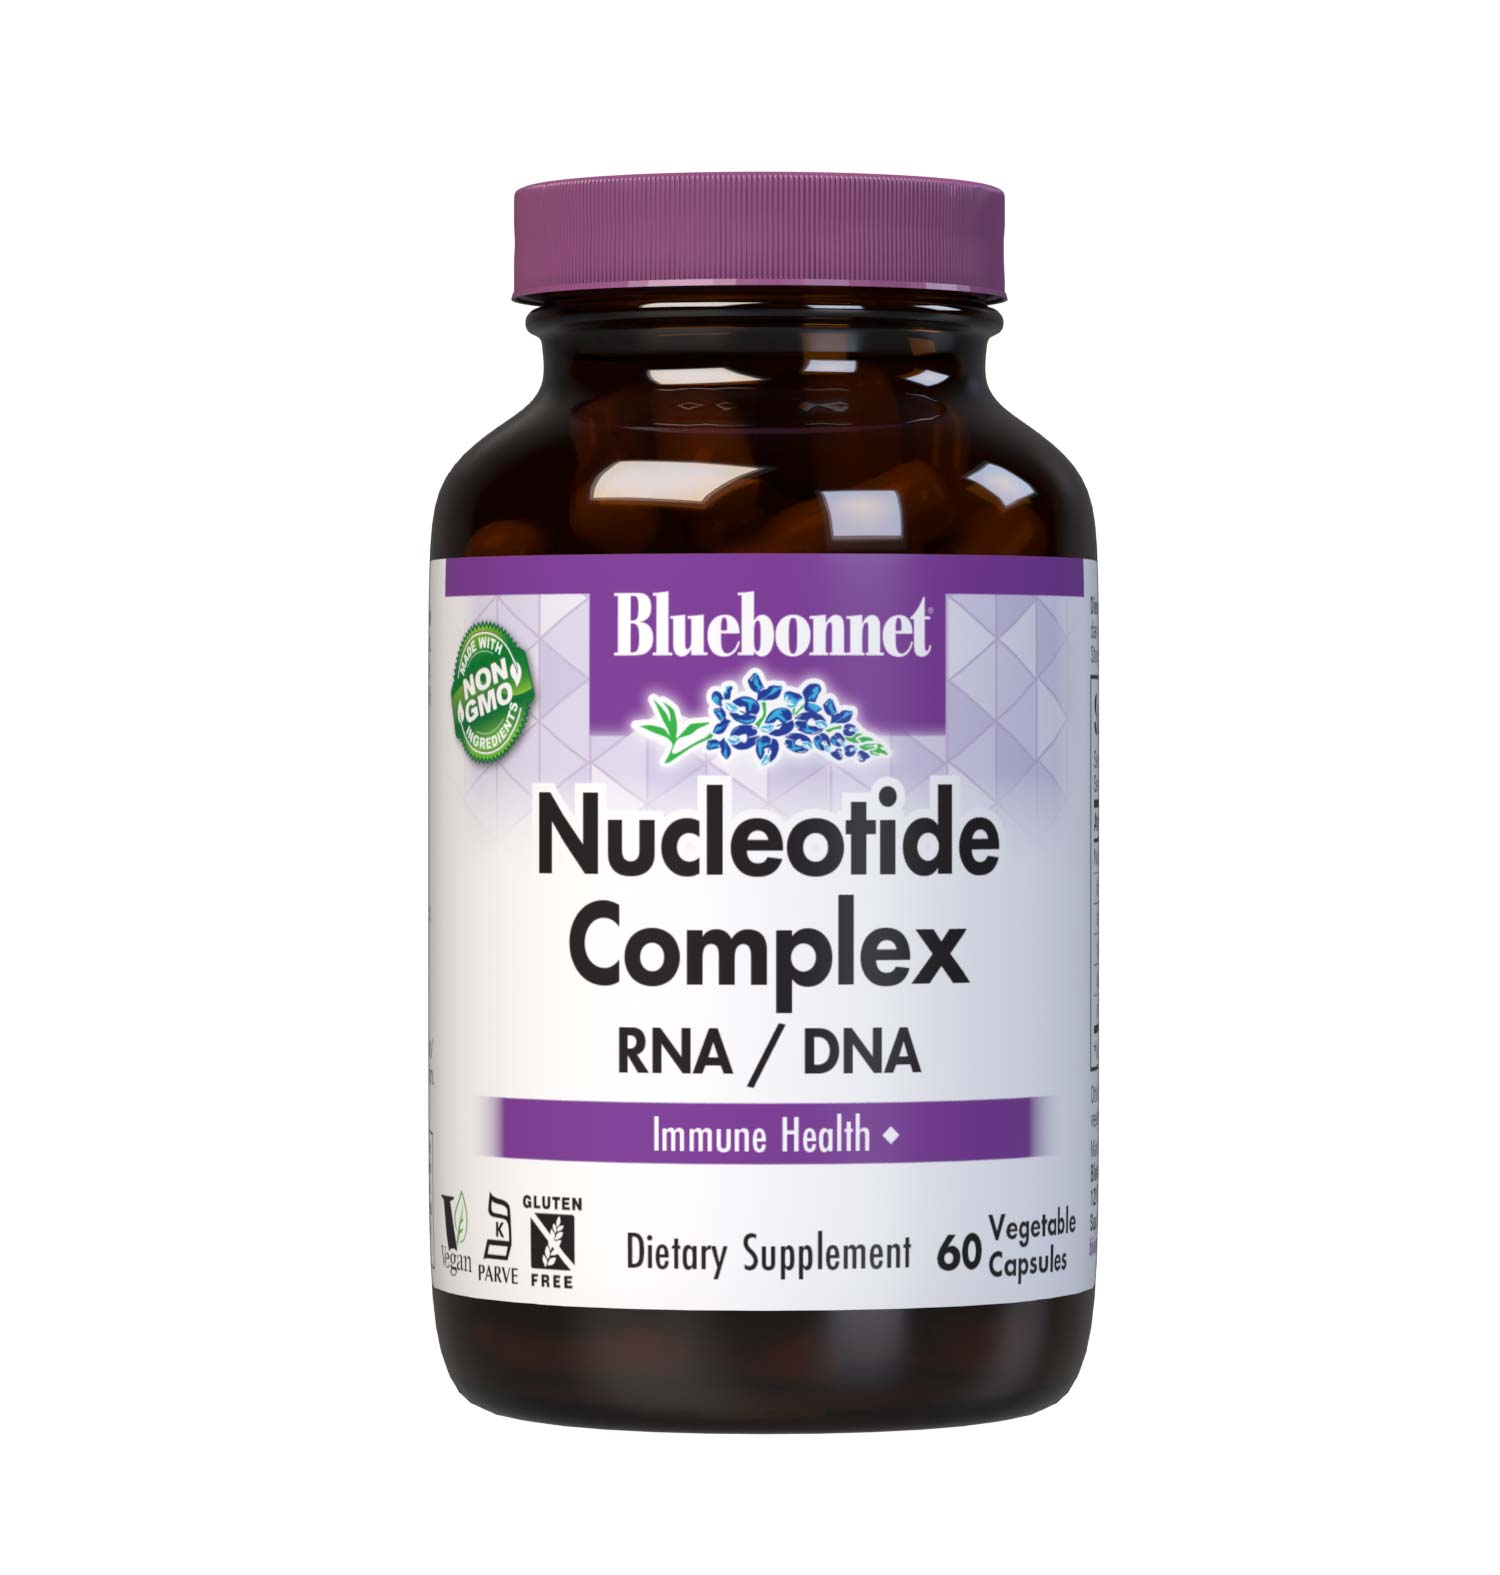 Bluebonnet’s Nucleotide Complex 500 mg Capsules contain a complete array of nucleotides, including adenosine, cytidine, guanosine and uridine, which are the necessary basic building blocks of RNA, DNA and ATP - the energy molecule. This nucleotide complex is carefully derived from torula yeast and helps support immune function. #size_60 count